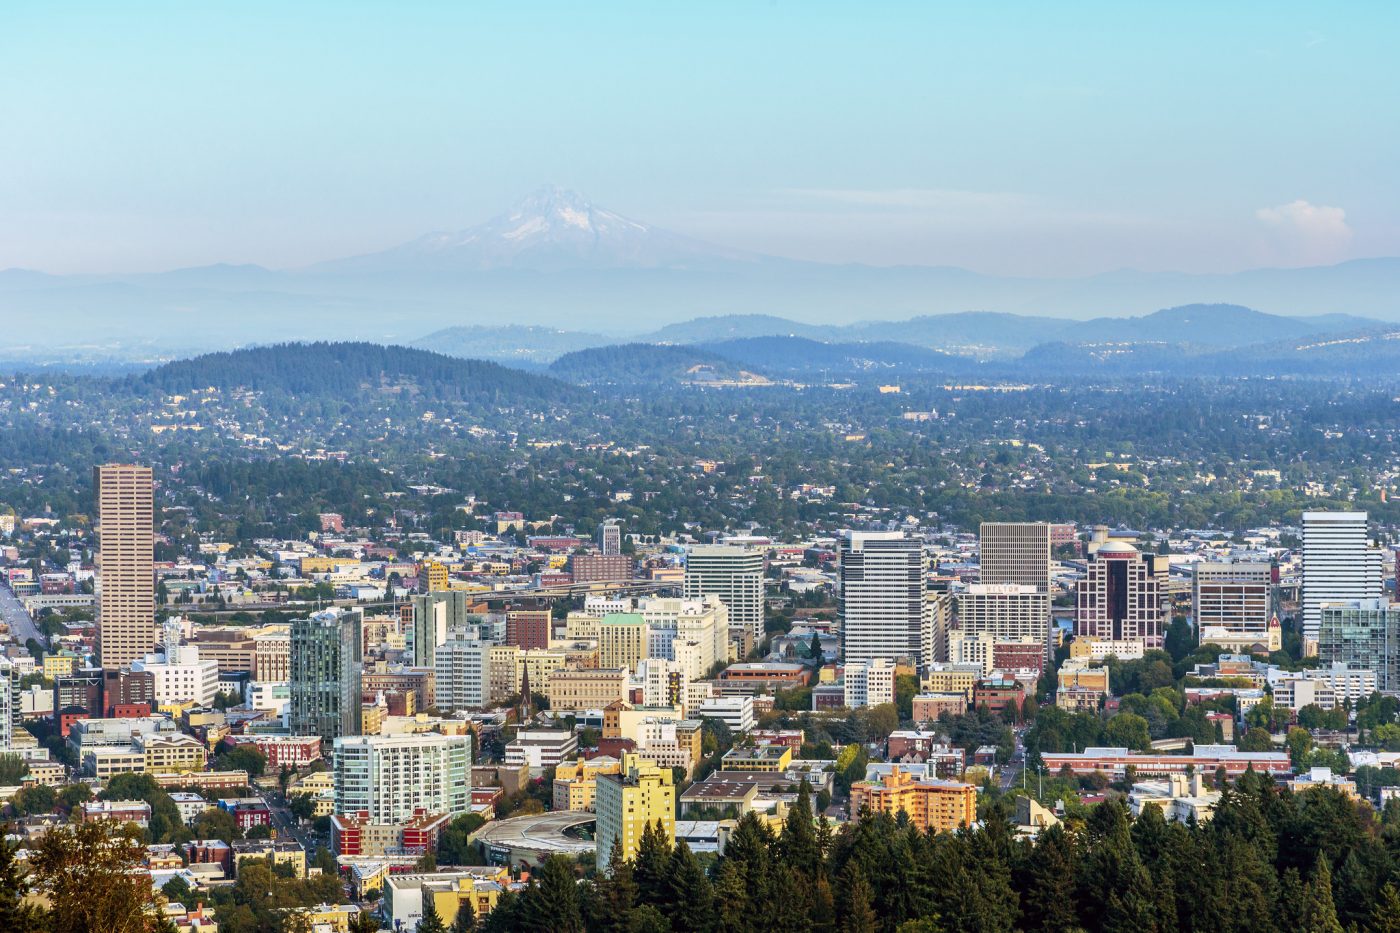 Sustainable City Guide: Things to do in Portland Oregon